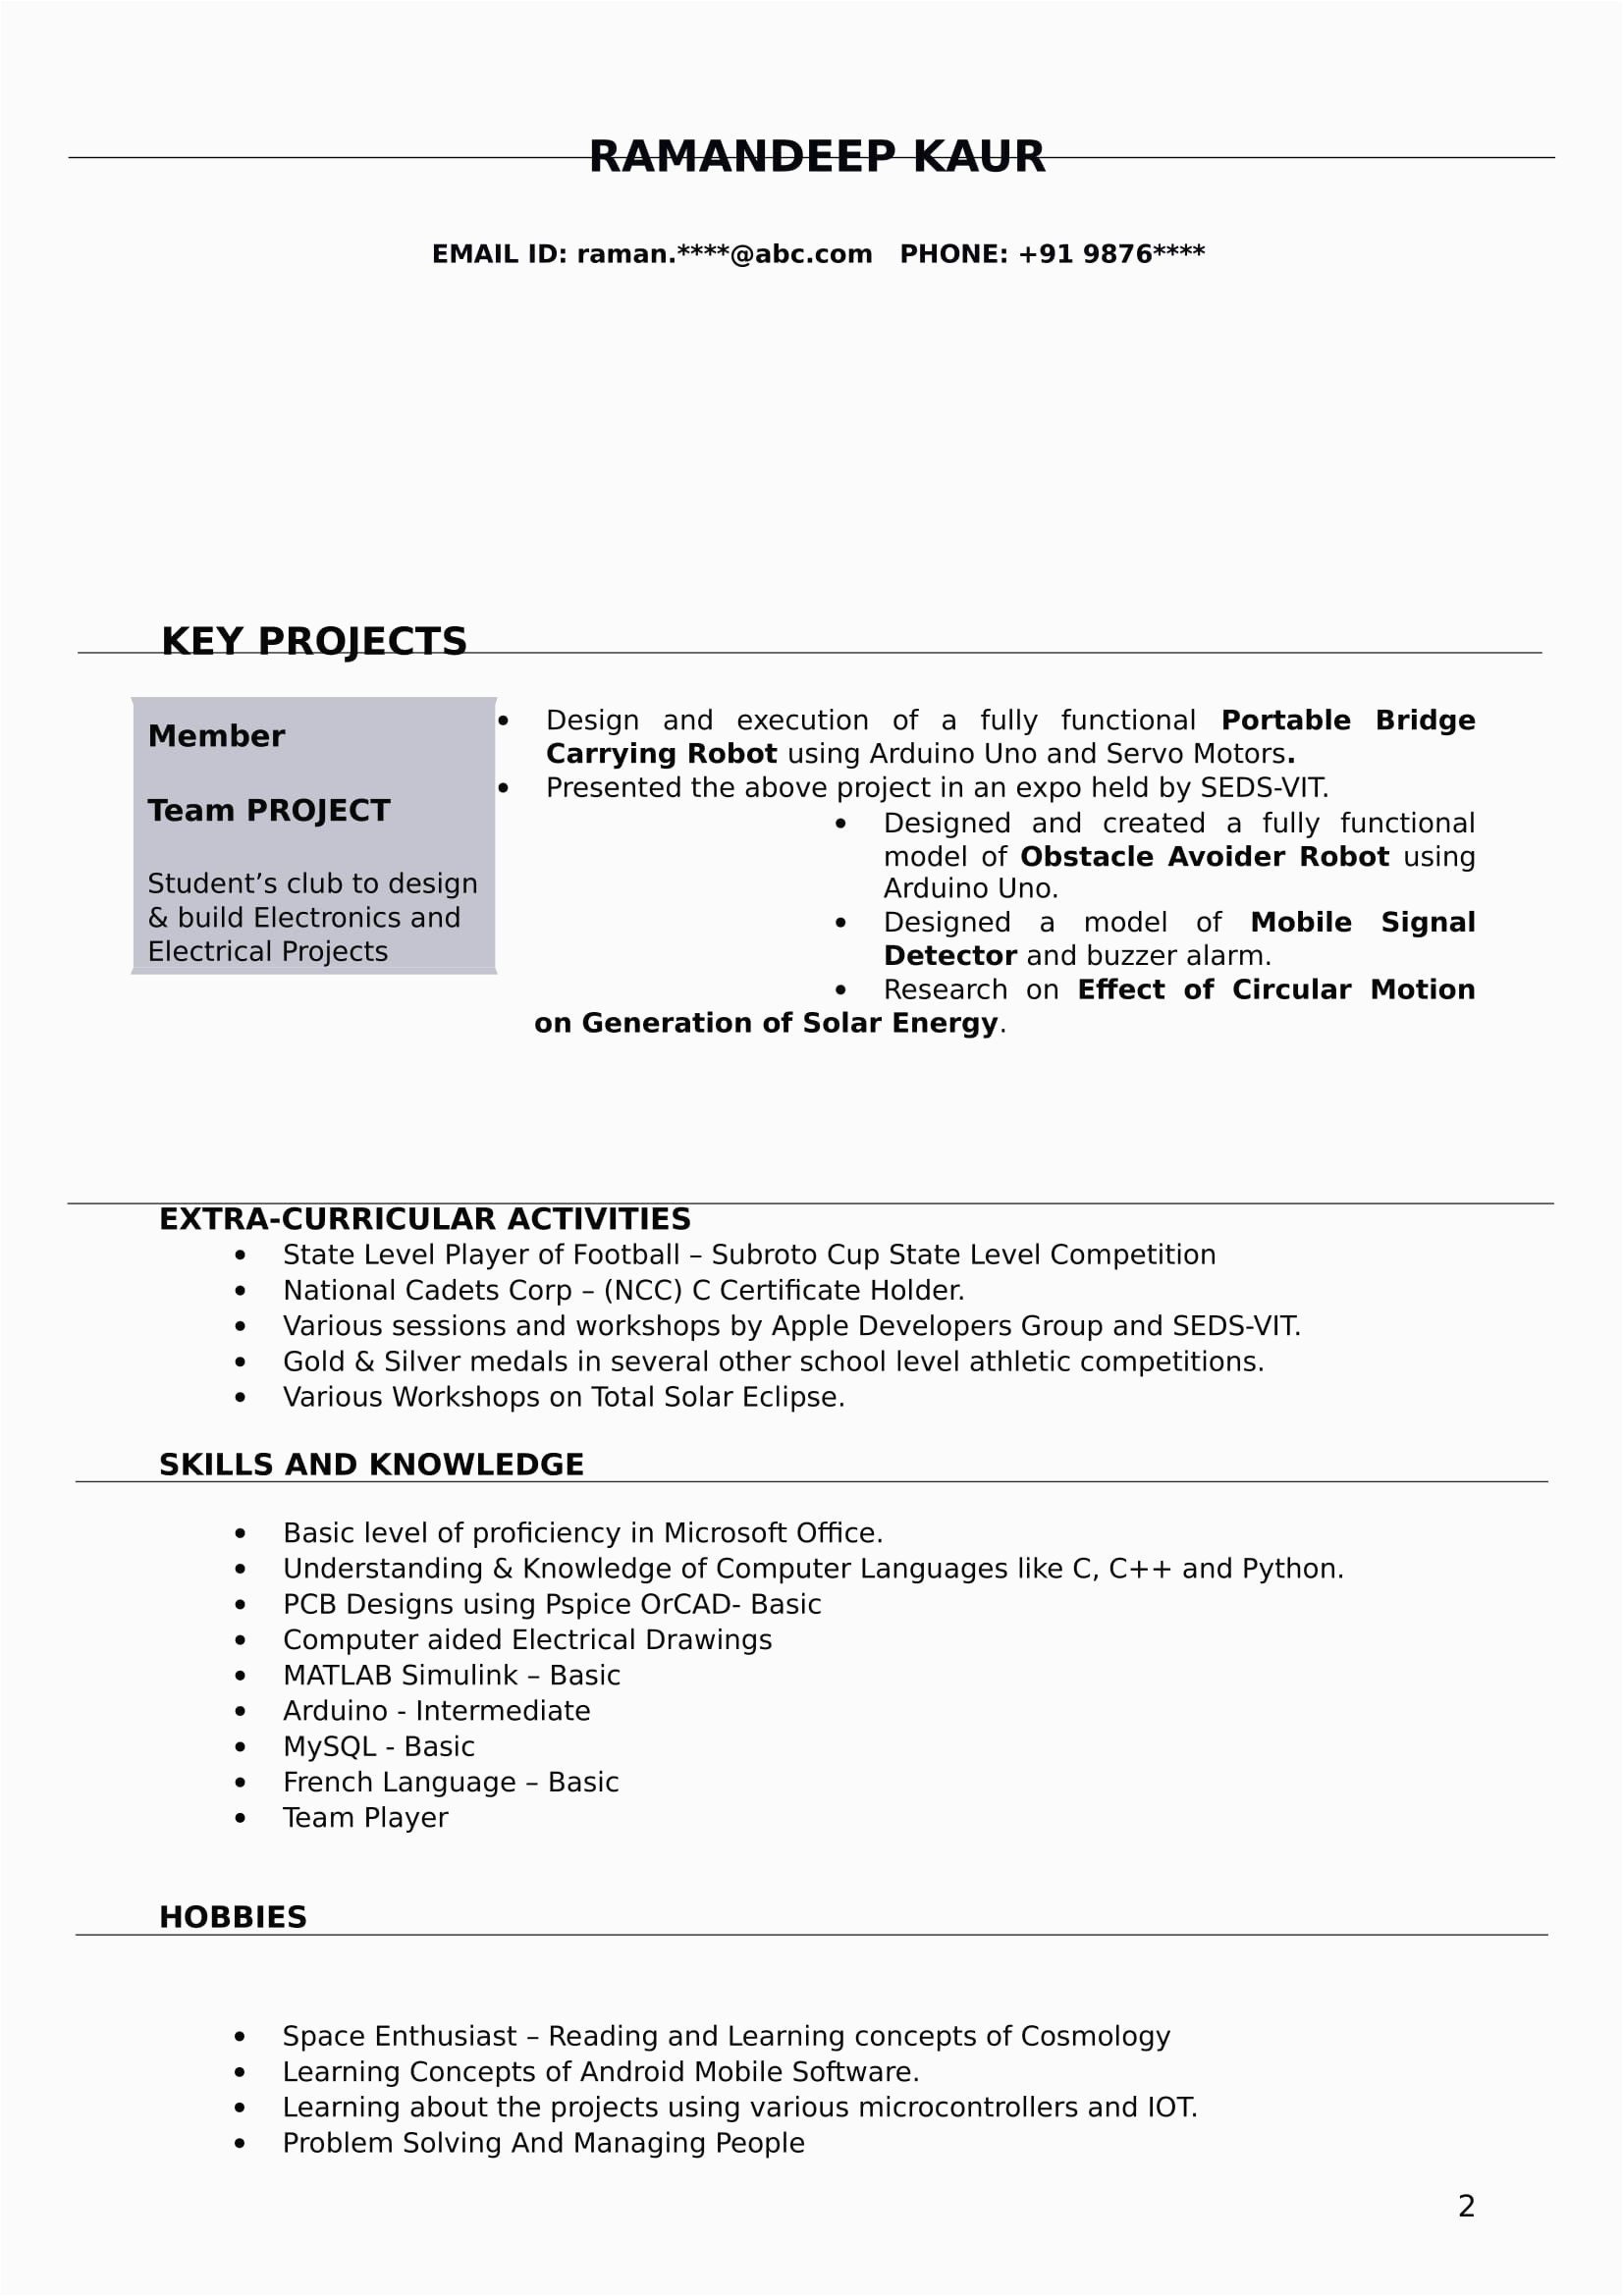 Sample Resume for Diploma Electrical Engineer Fresher Electrical Engineer Resume Pdf